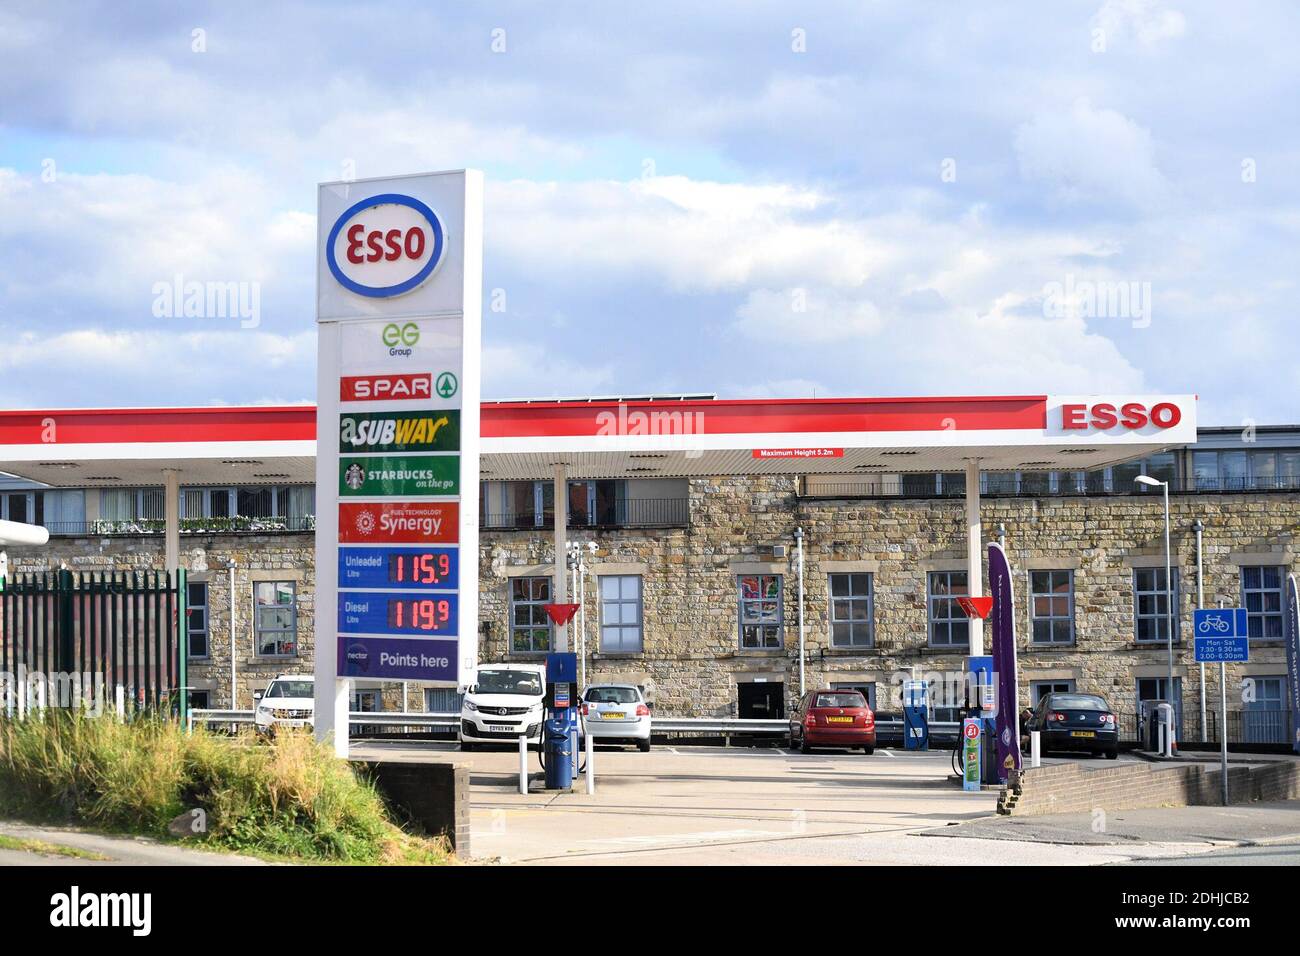 GV of ESSO SPAR Euro Garages on Brandlesholme Road, Bury, Thursday 1st October 2020. Supermarket chain Asda is to be sold to two brothers from Blackburn in a deal worth £6.8bn.  The new owners, Mohsin and Zuber Issa, who have backed by investment firm TDR Capital, founded their Euro Garages business in 2001 with a single petrol station in Bury which they bought for £150,000. The business now has around sites in Europe, the United States and Australia and annual sales of around £18bn. Stock Photo